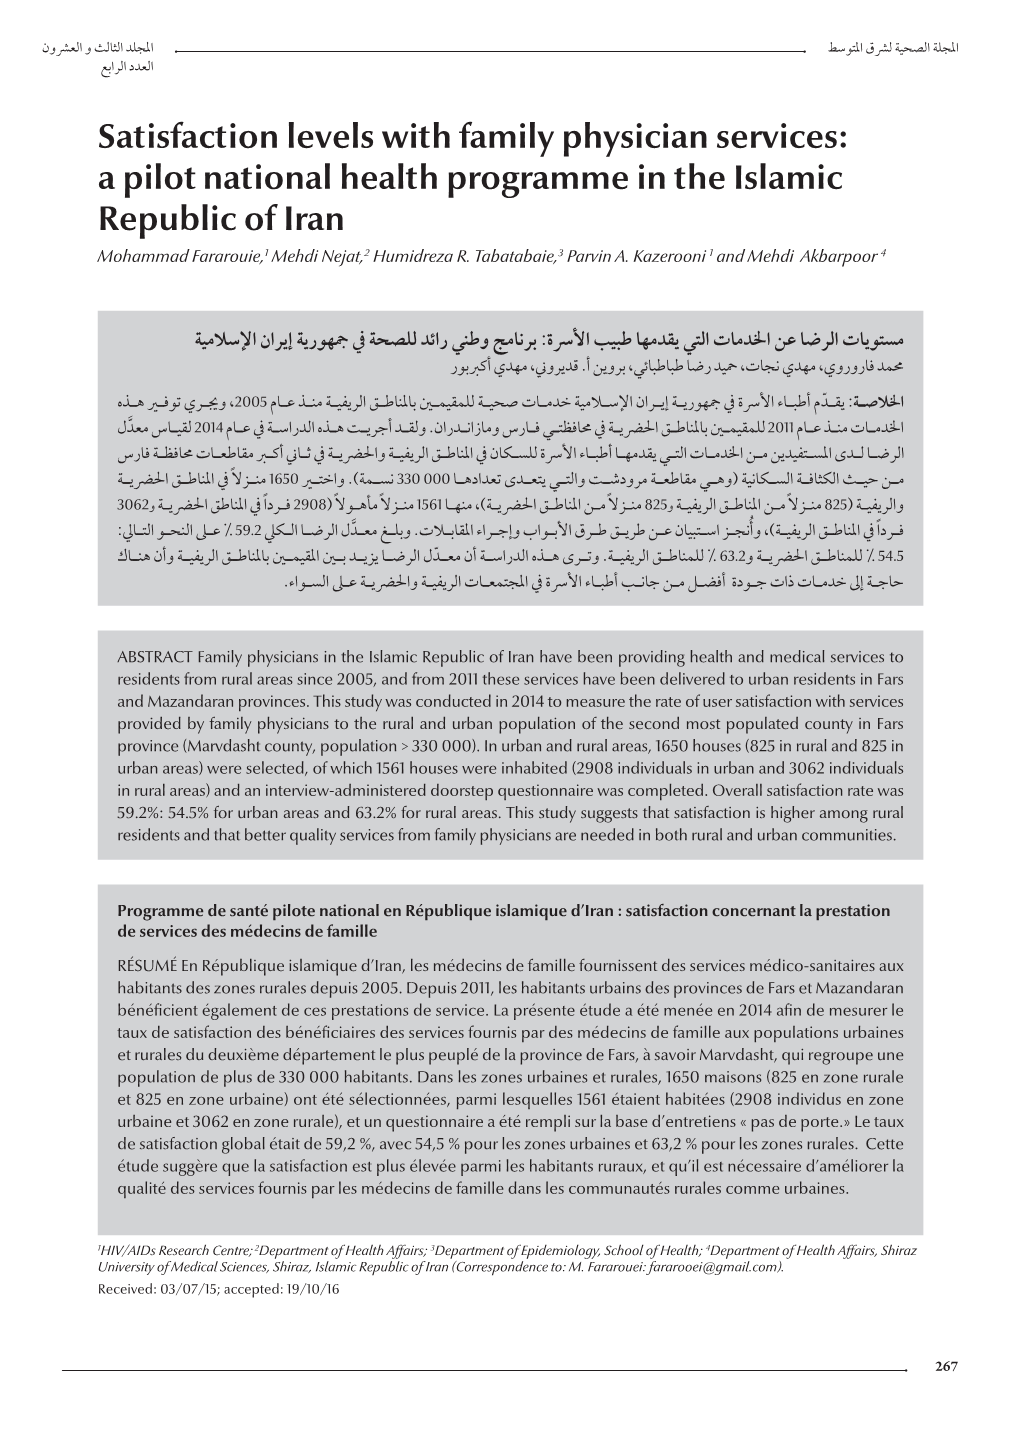 Satisfaction Levels with Family Physician Services: a Pilot National Health Programme in the Islamic Republic of Iran Mohammad Fararouie,1 Mehdi Nejat,2 Humidreza R